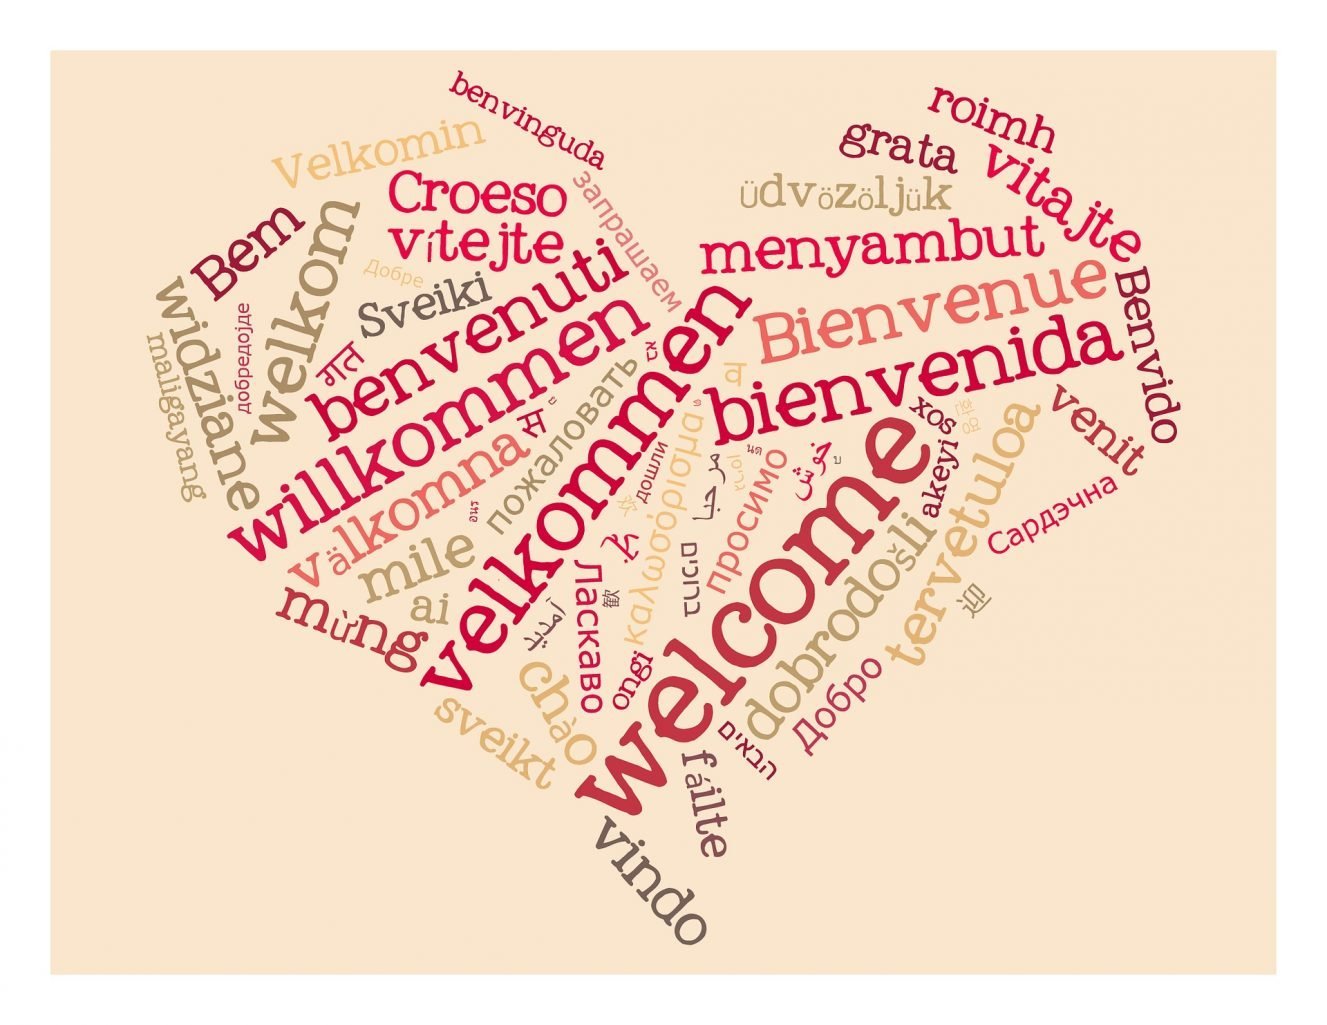 This shows the word &quot;welcome&quot; written in different languages in the shape of a heart